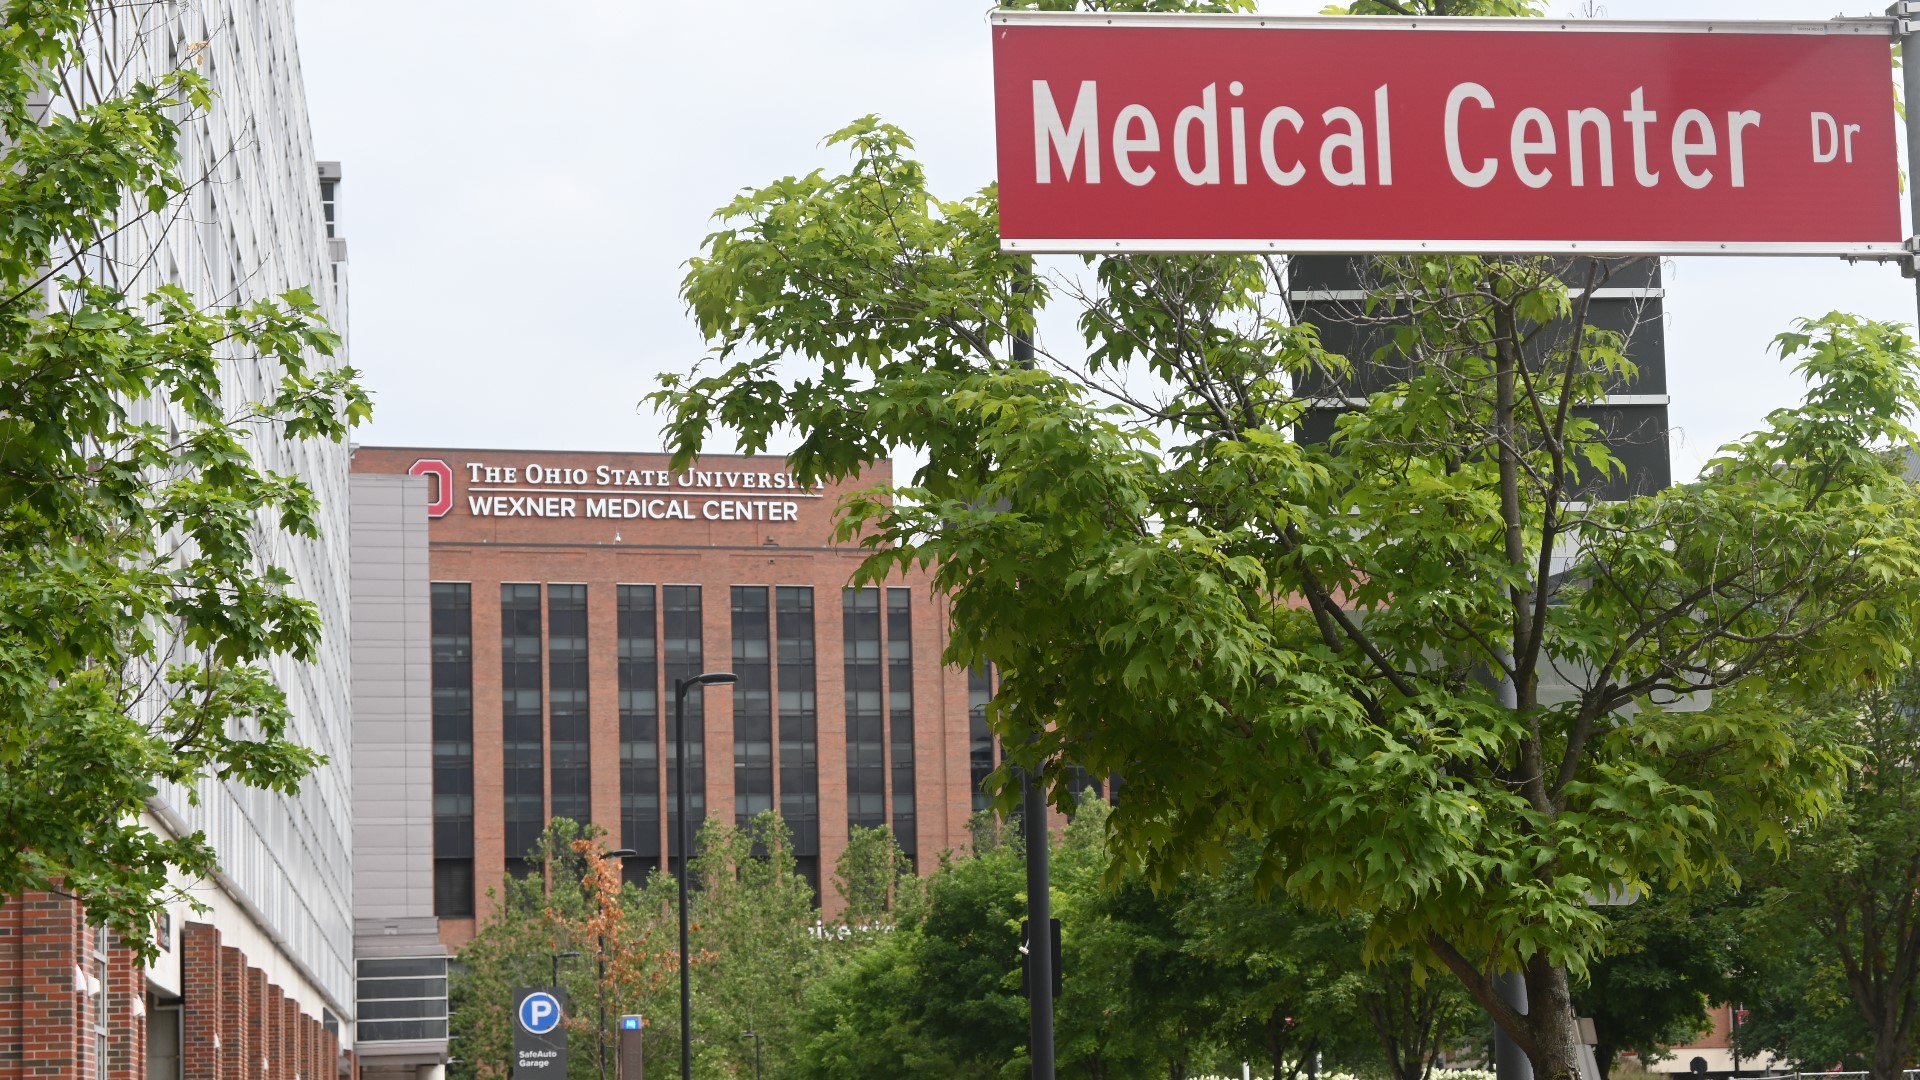 Earlier this week, the Ohio State University Wexner Medical Center announced it is now scheduling third-dose vaccine appointments for patients who qualify.